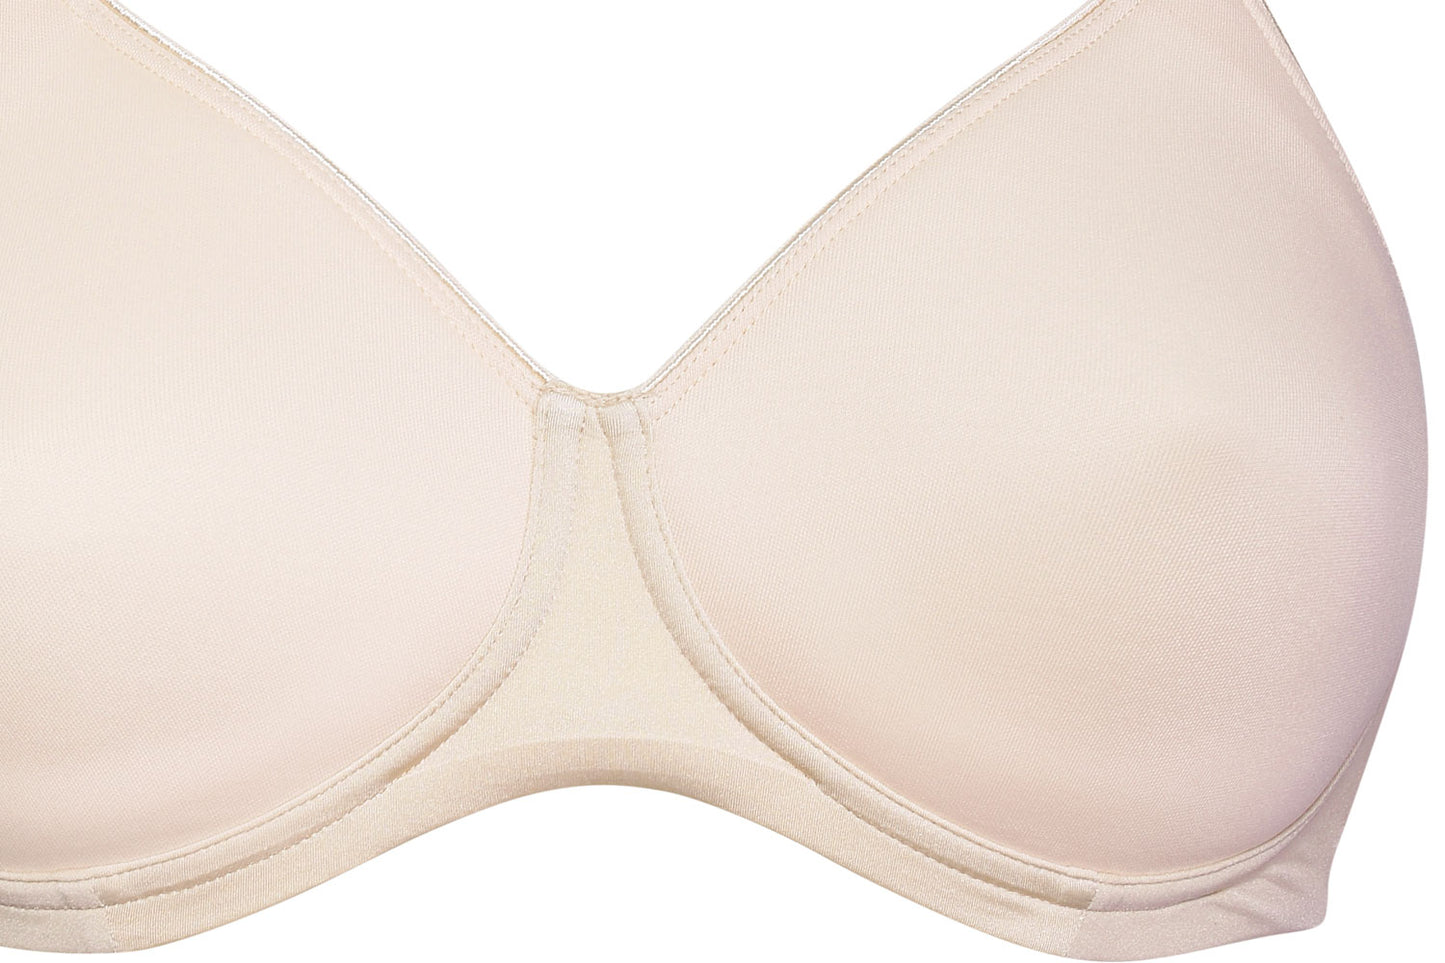 Powder beige wireless spacer cup bra from the Plus line by SIéLEI from Italy.